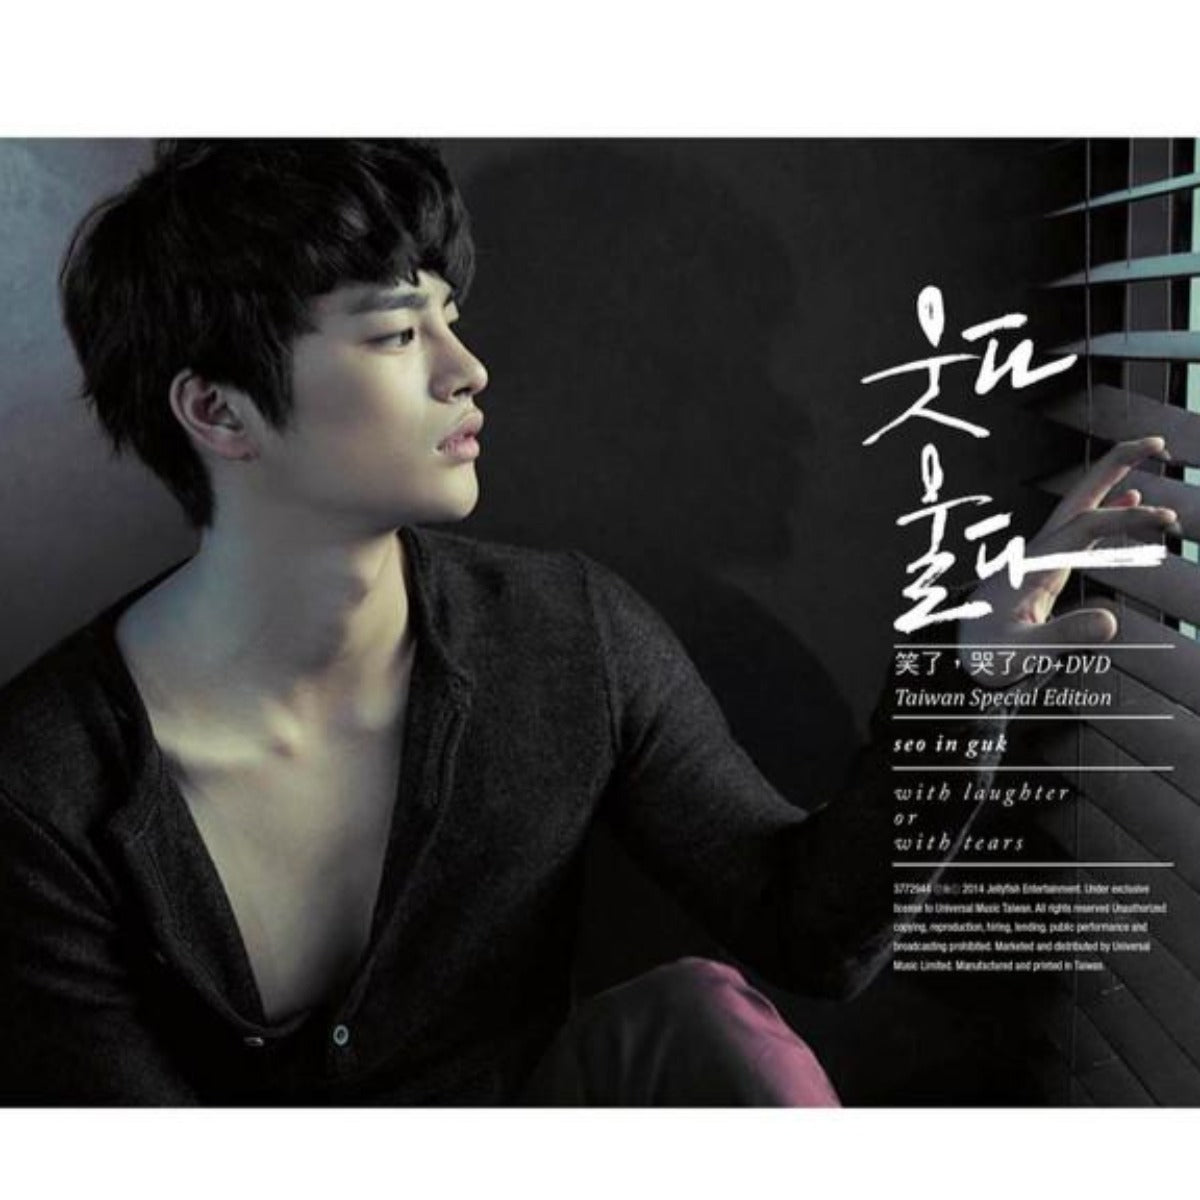 Seo In Guk - with Laughter or with Tears (CD + DVD) (Taiwan Special Edition)